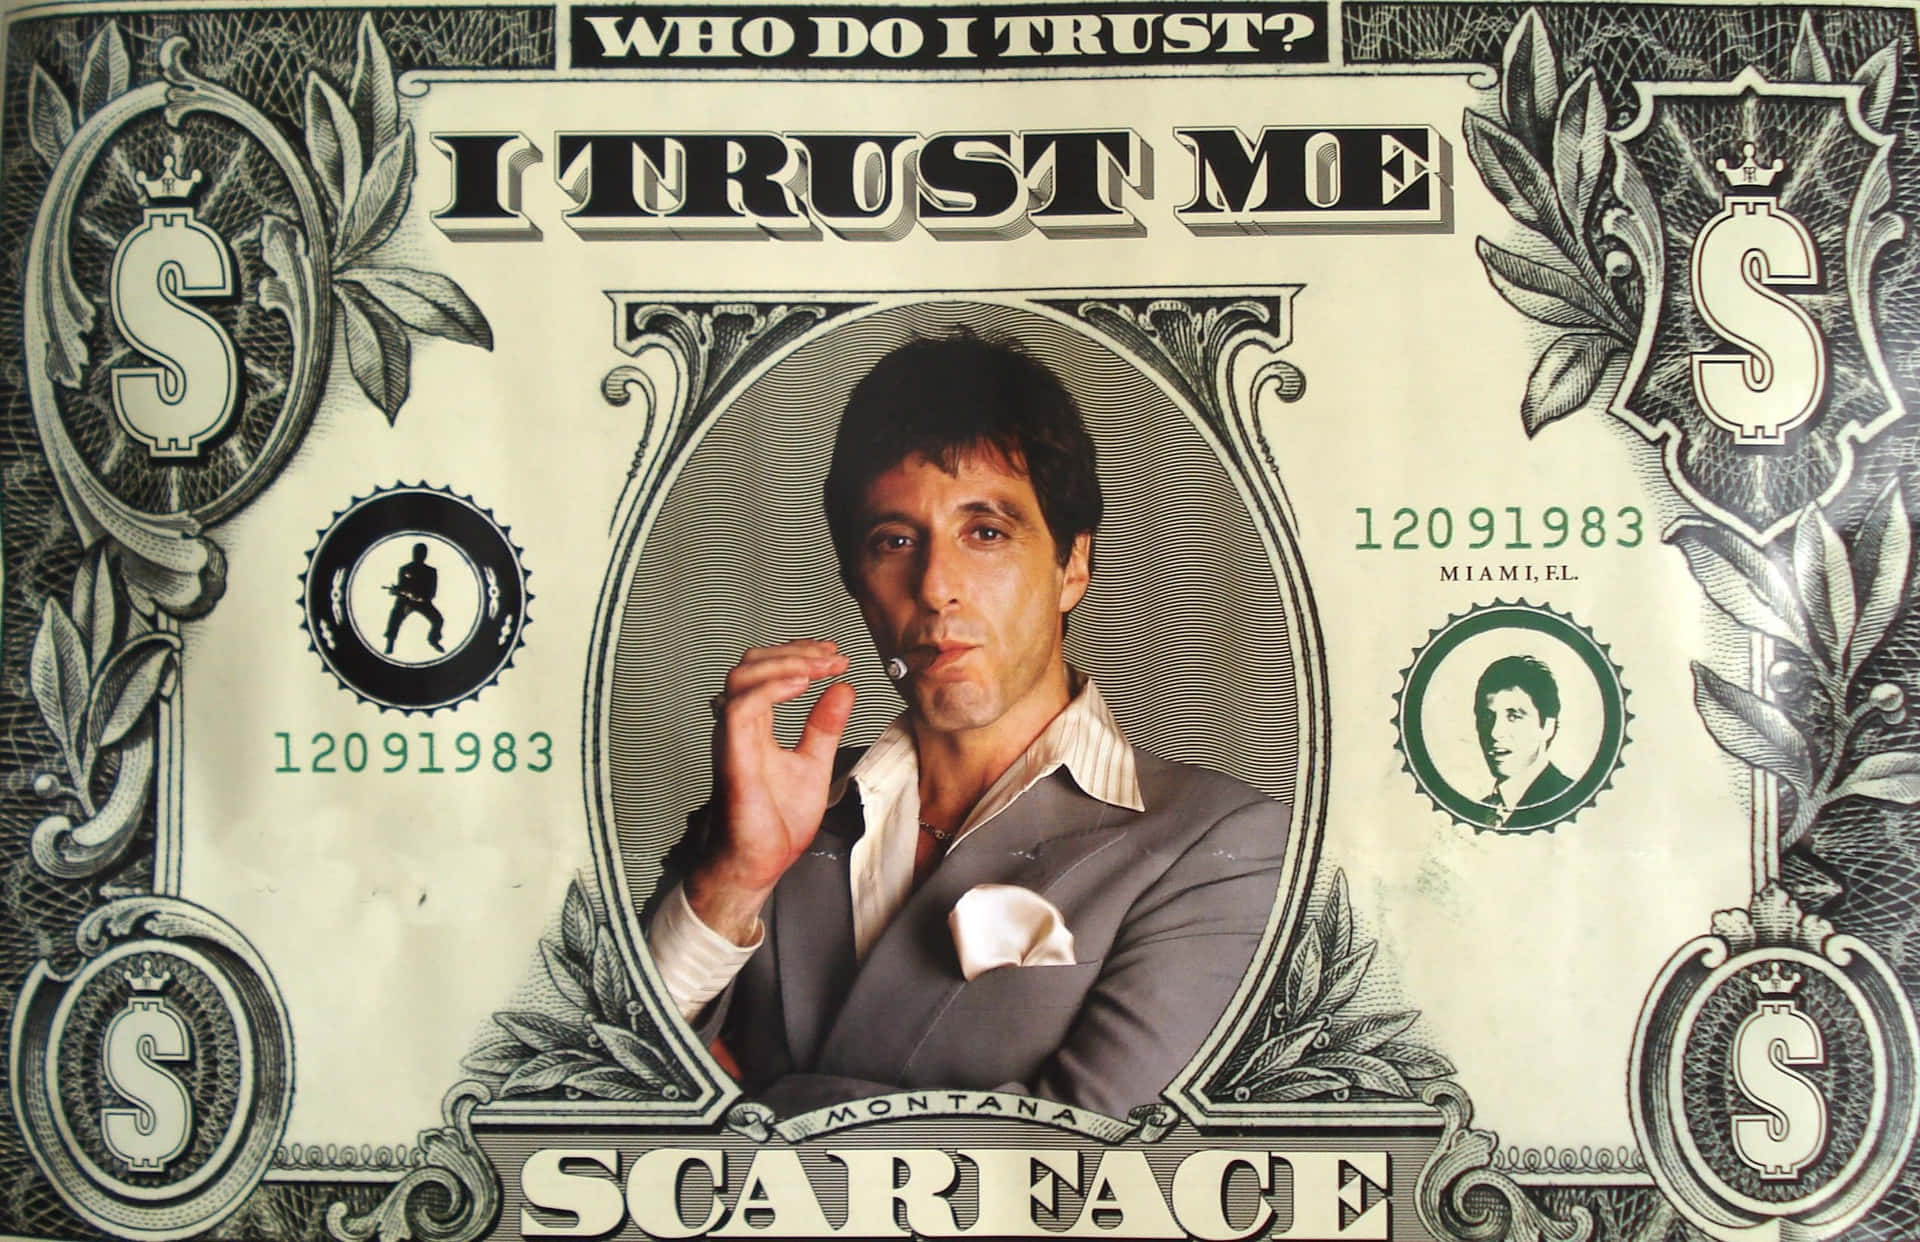 Tony Montana, influential and notorious protagonist of Scarface.